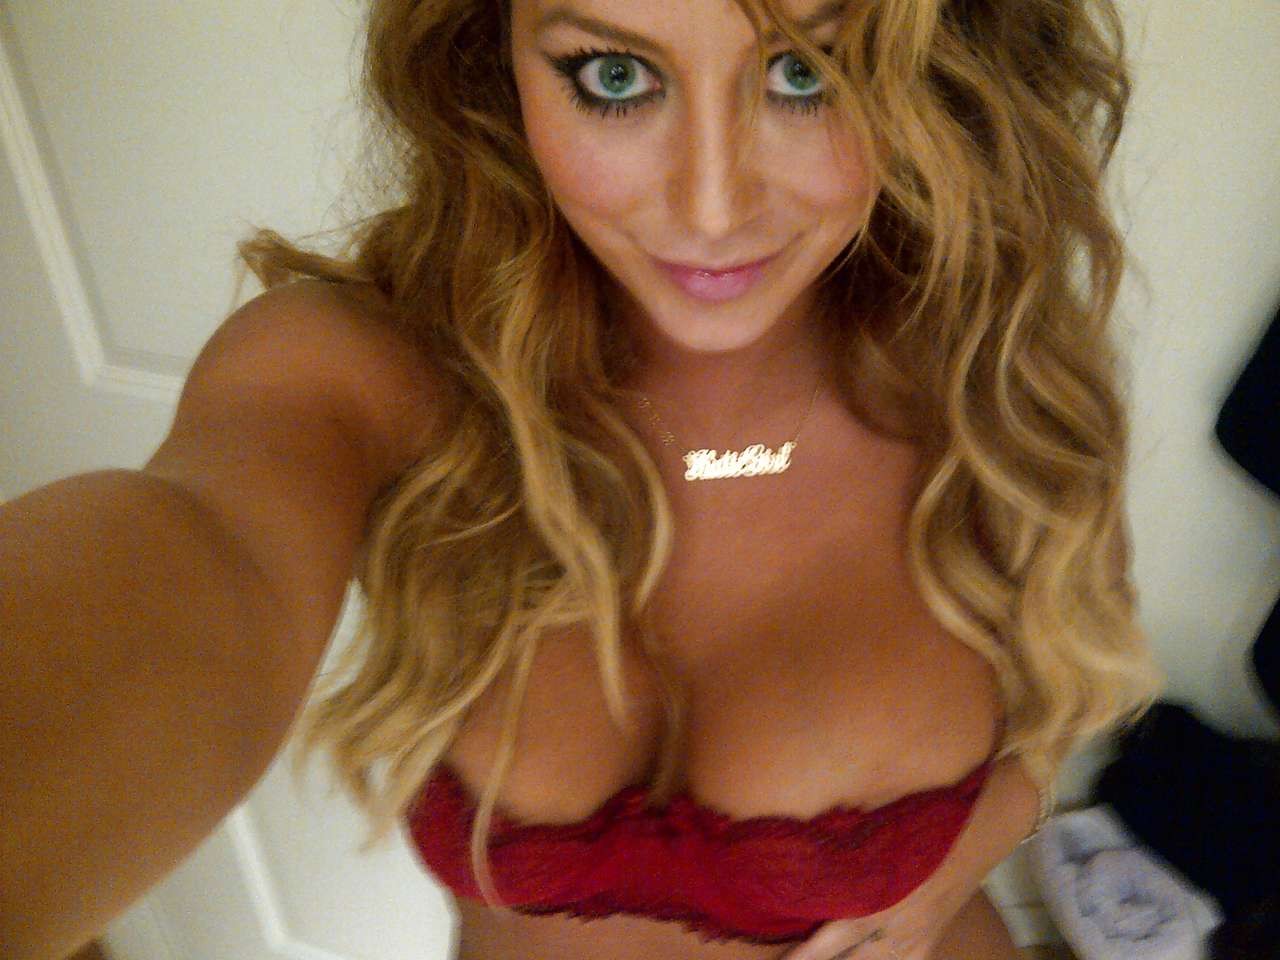 Aubrey O'Day posing in various bikinis and topless selfshoot for Twitter #75295160